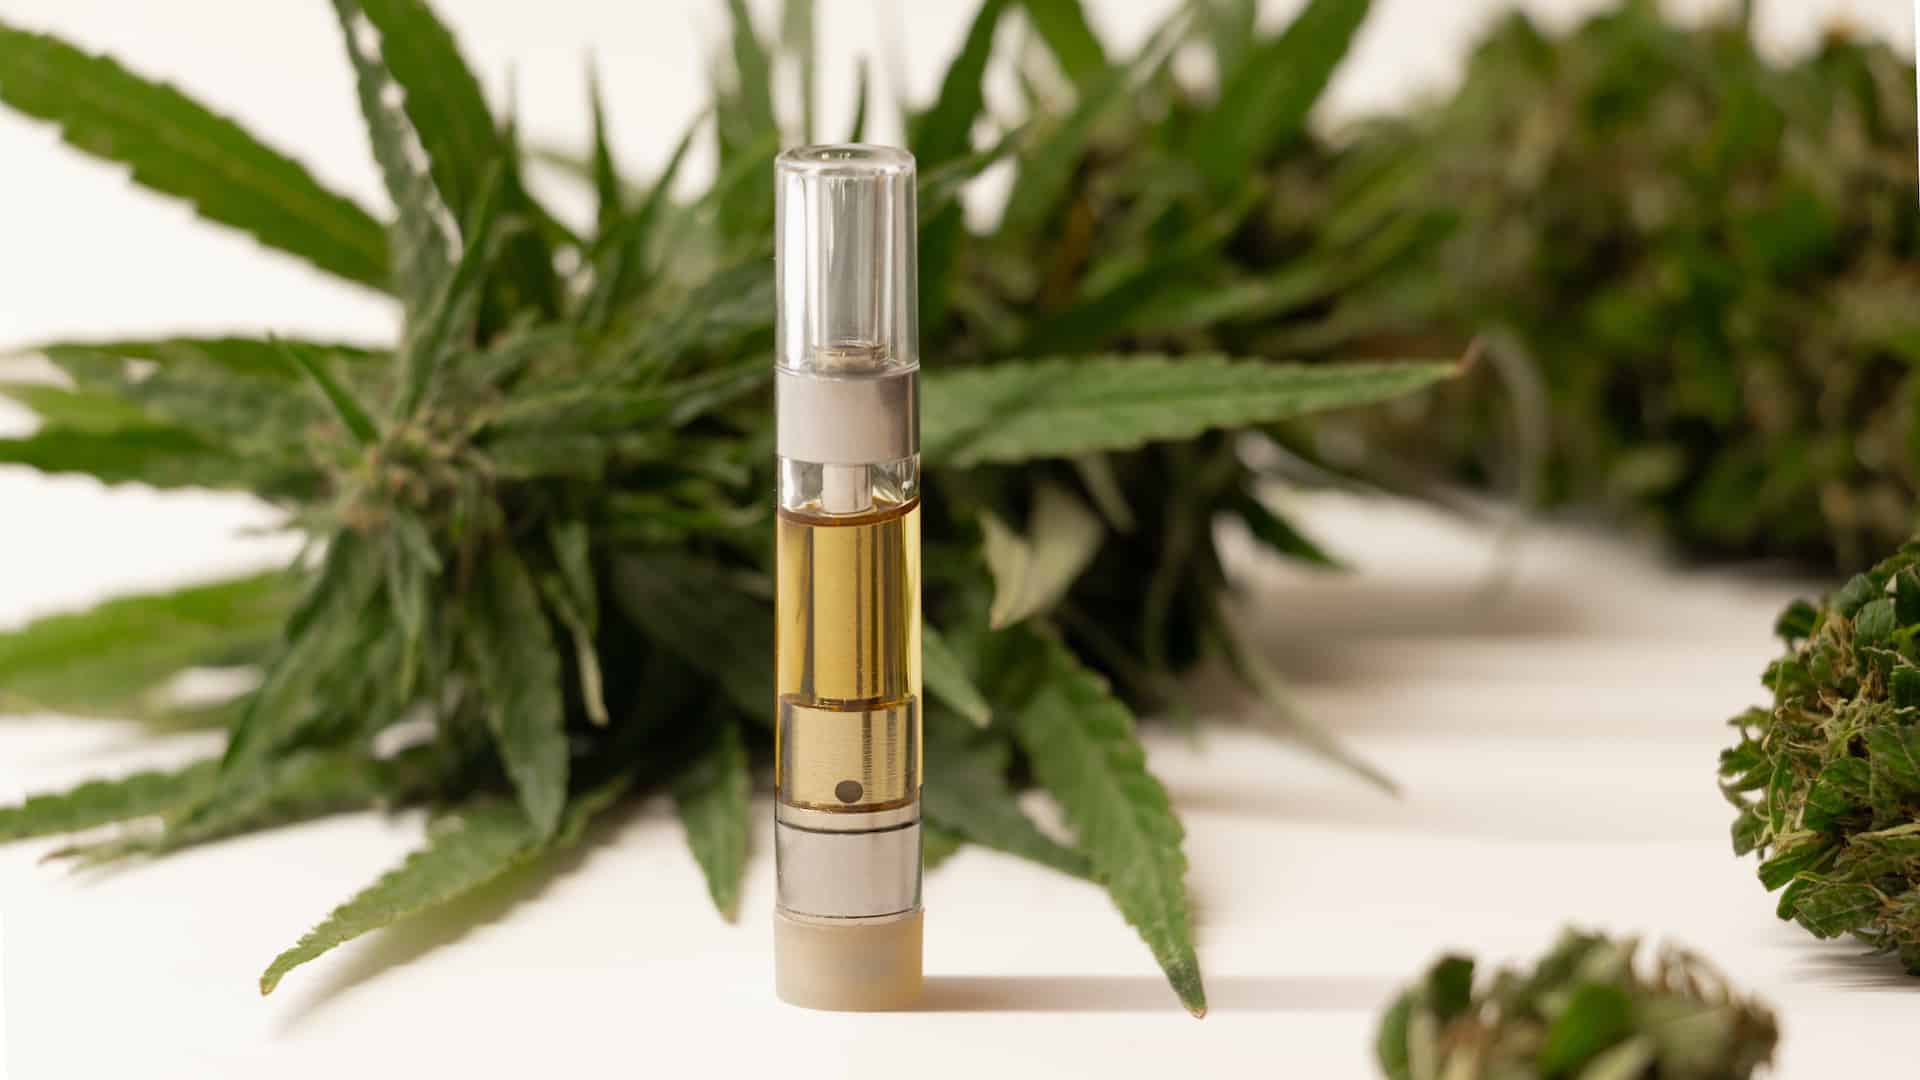 Vape cartridge filled with fluid in front of large hemp flower bud, top thc cartridges to buy